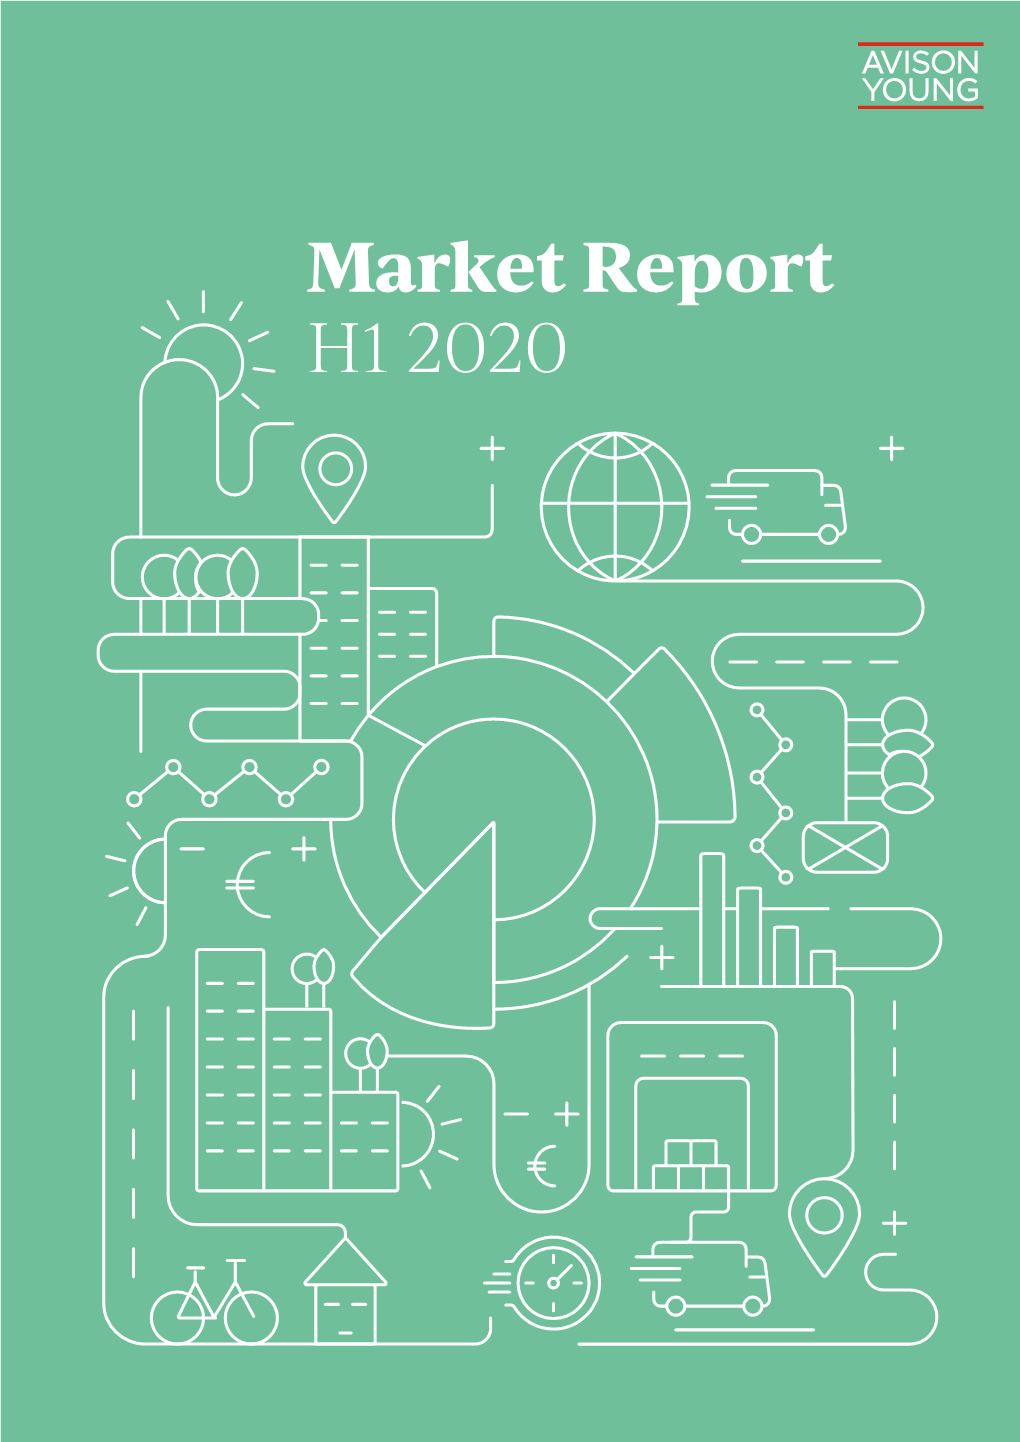 Market Report H1 2020 About Us Contents